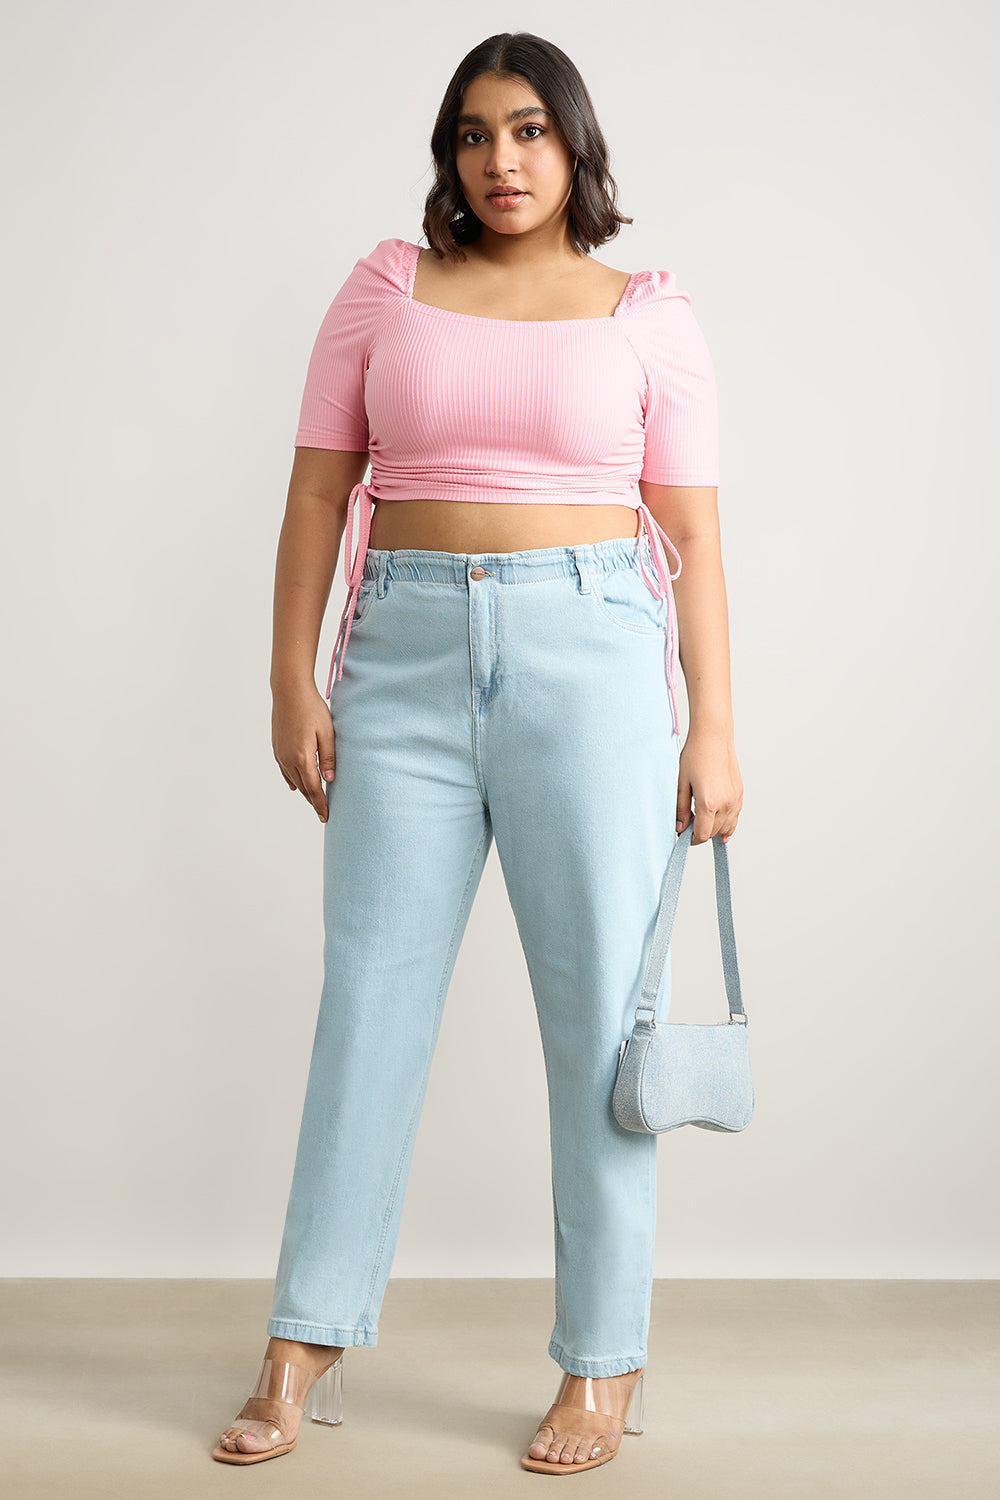 RUCHED PINK TOP